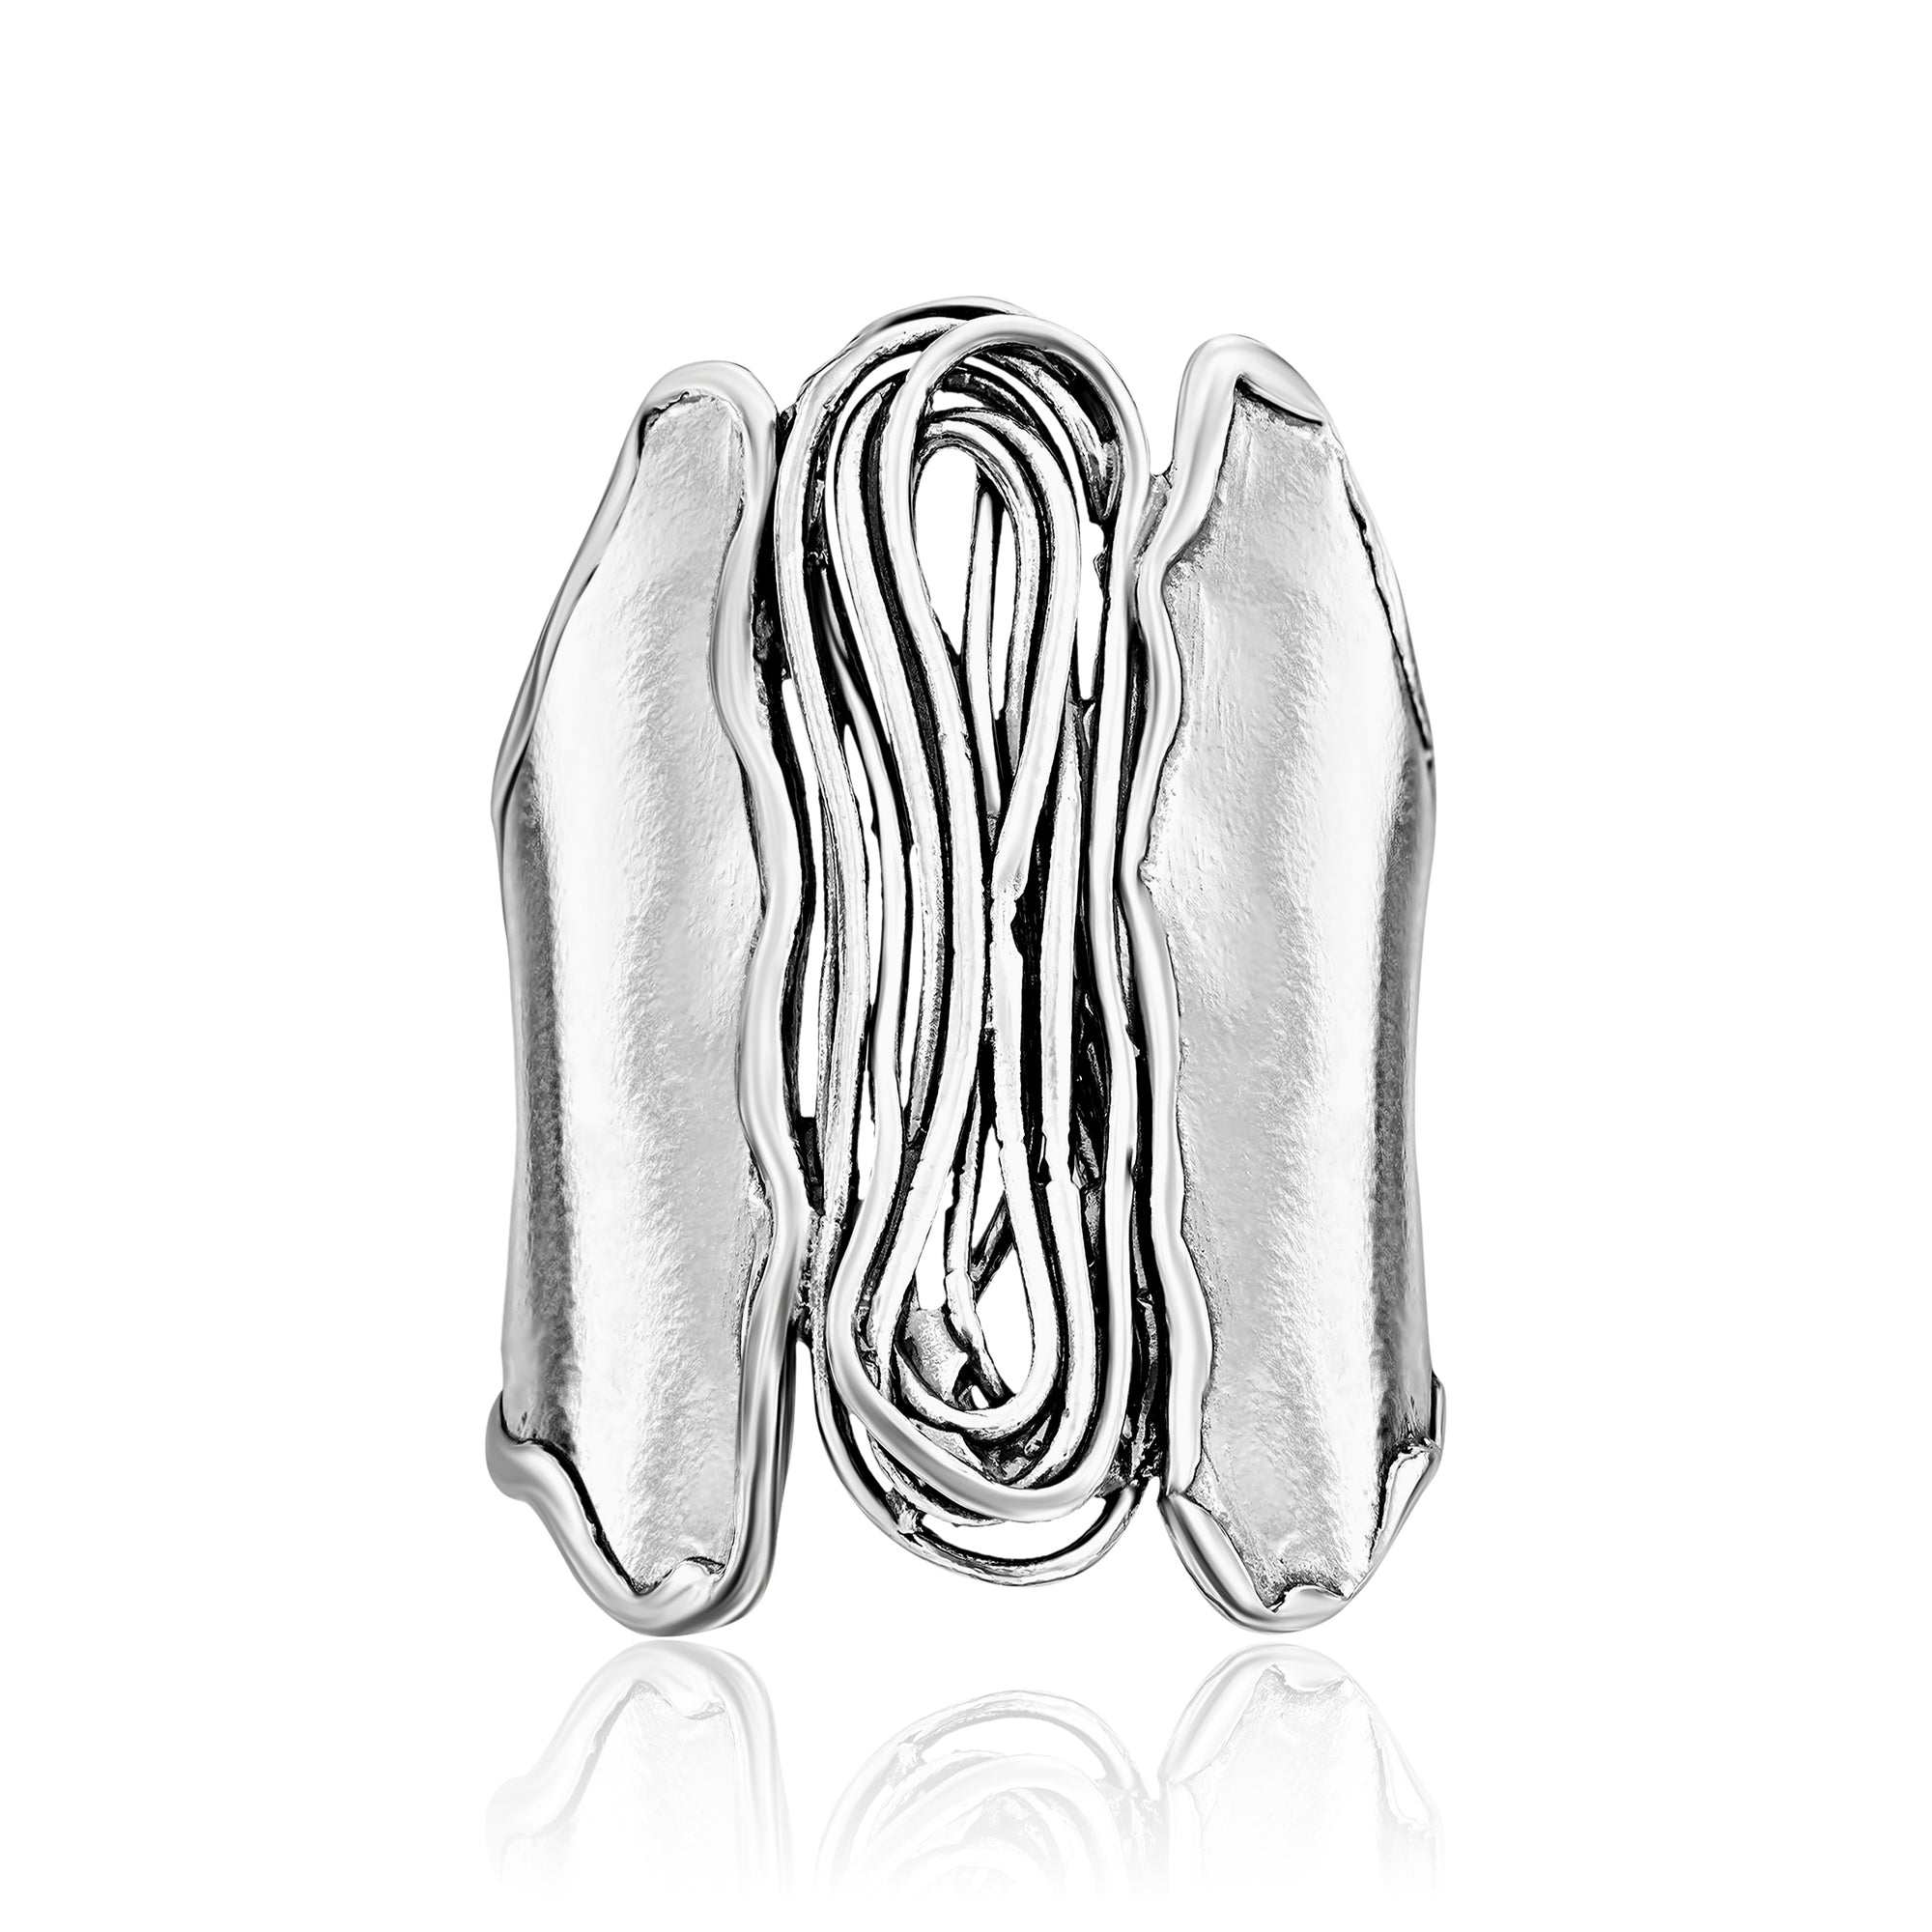 Contemporary Sterling Silver Shield Ring